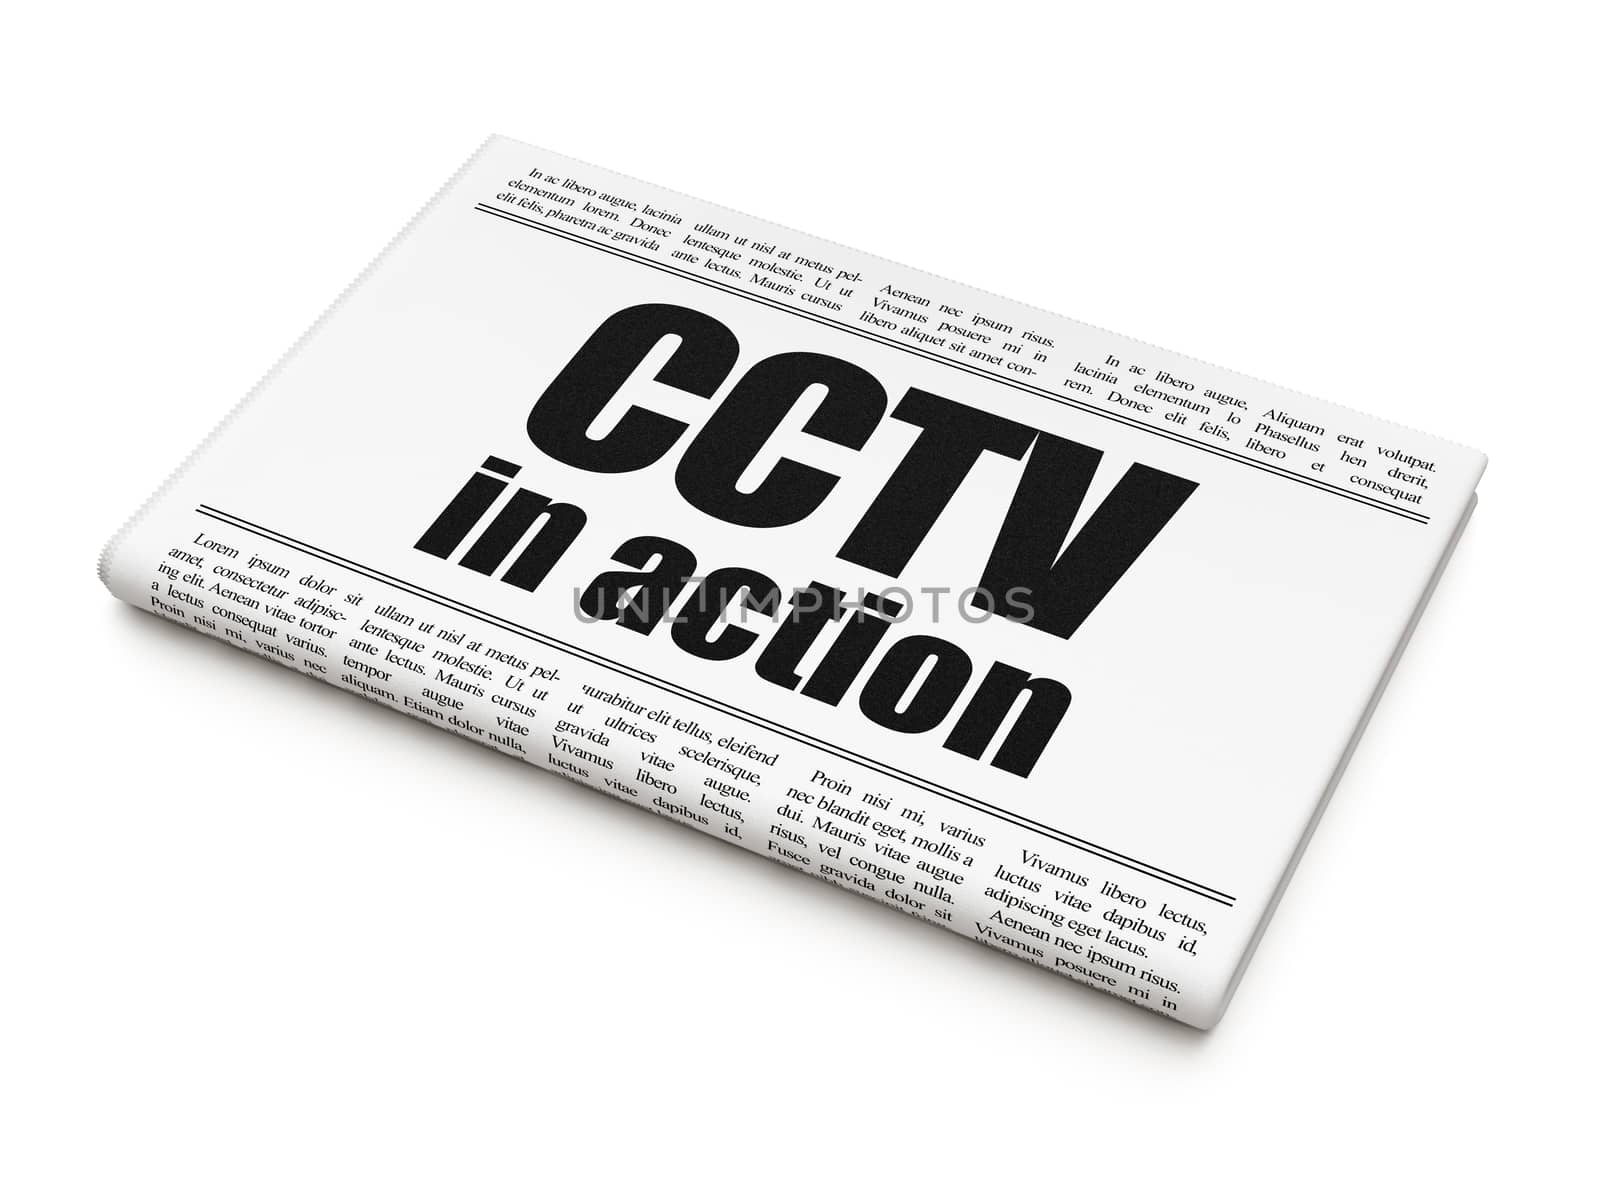 Protection news concept: newspaper headline CCTV In action by maxkabakov